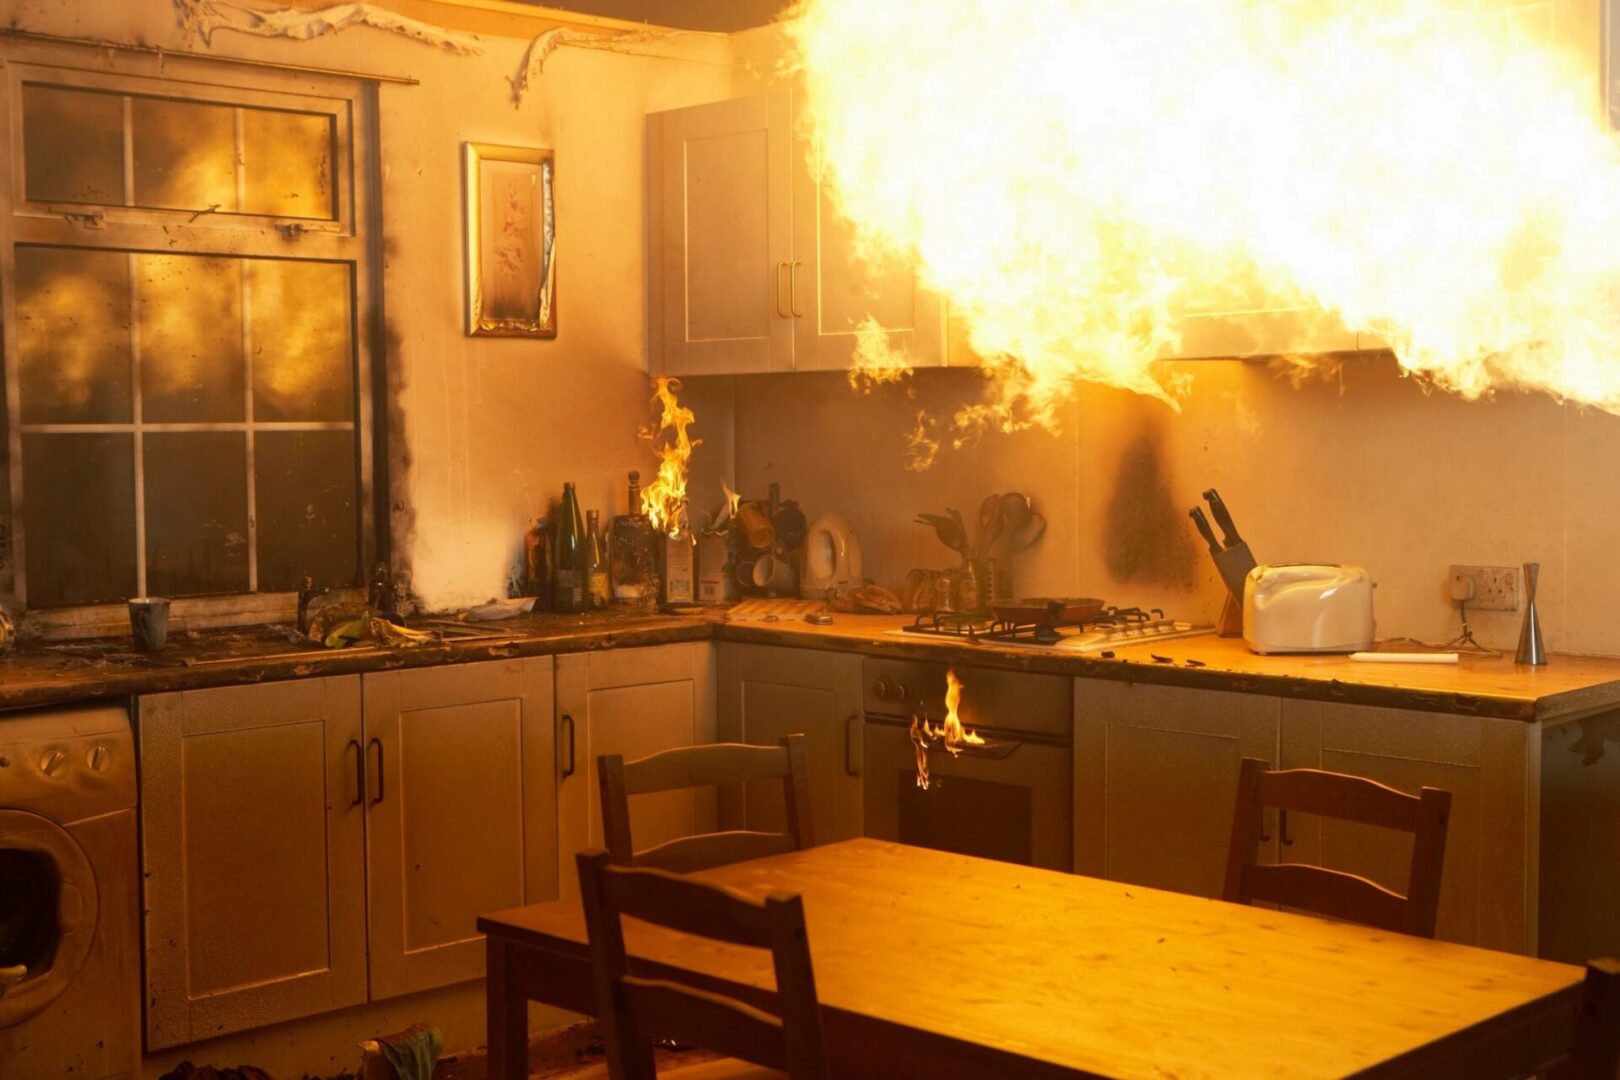 A kitchen with flames coming from the oven.